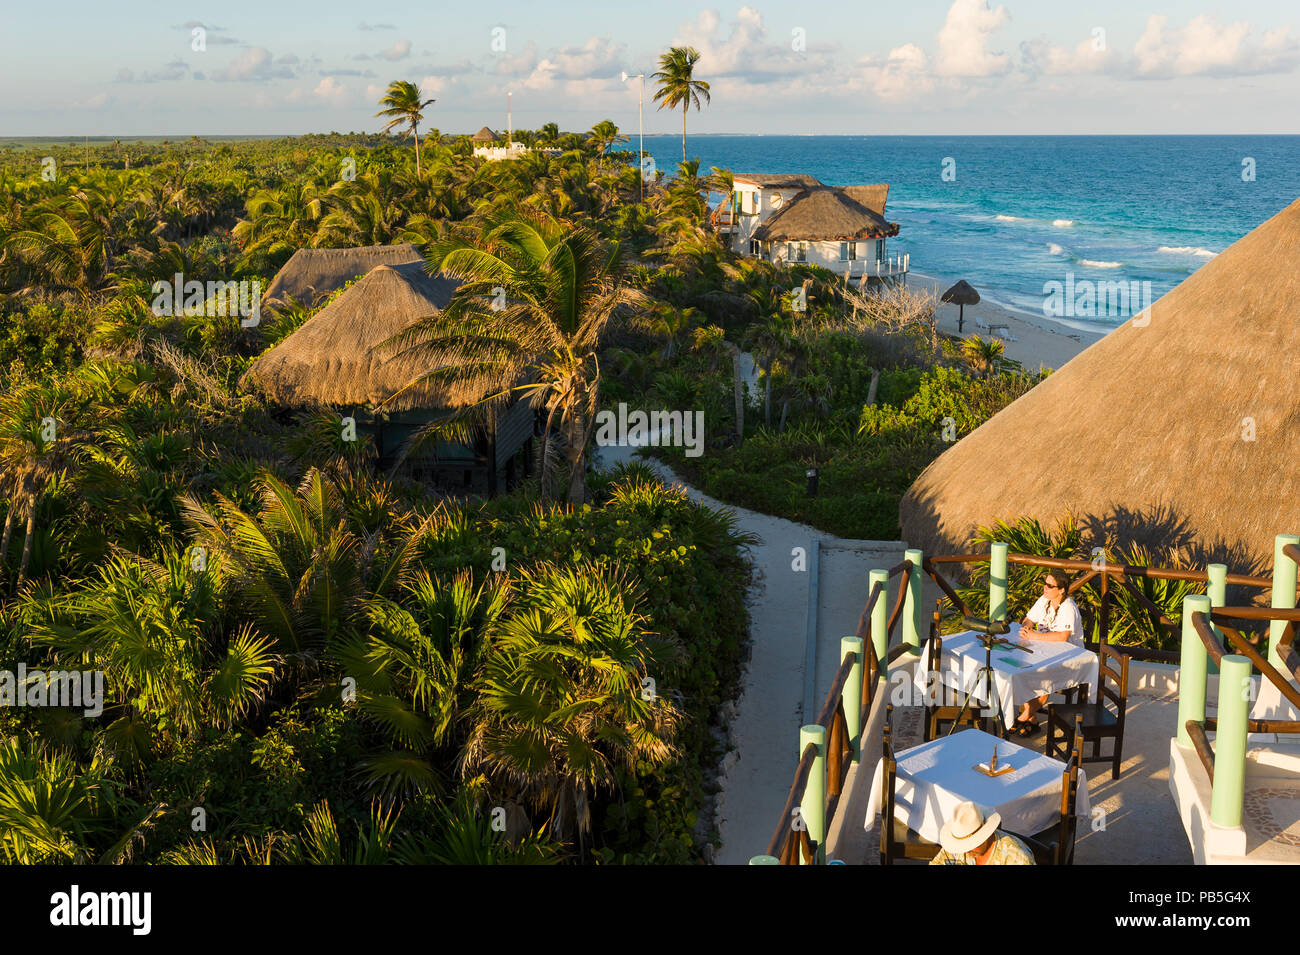 Sian Ka'an Biosphere Reserve in Tulum, Mexico as seen from the eco-friendly Cesiak hotel and tent cabins. Stock Photo